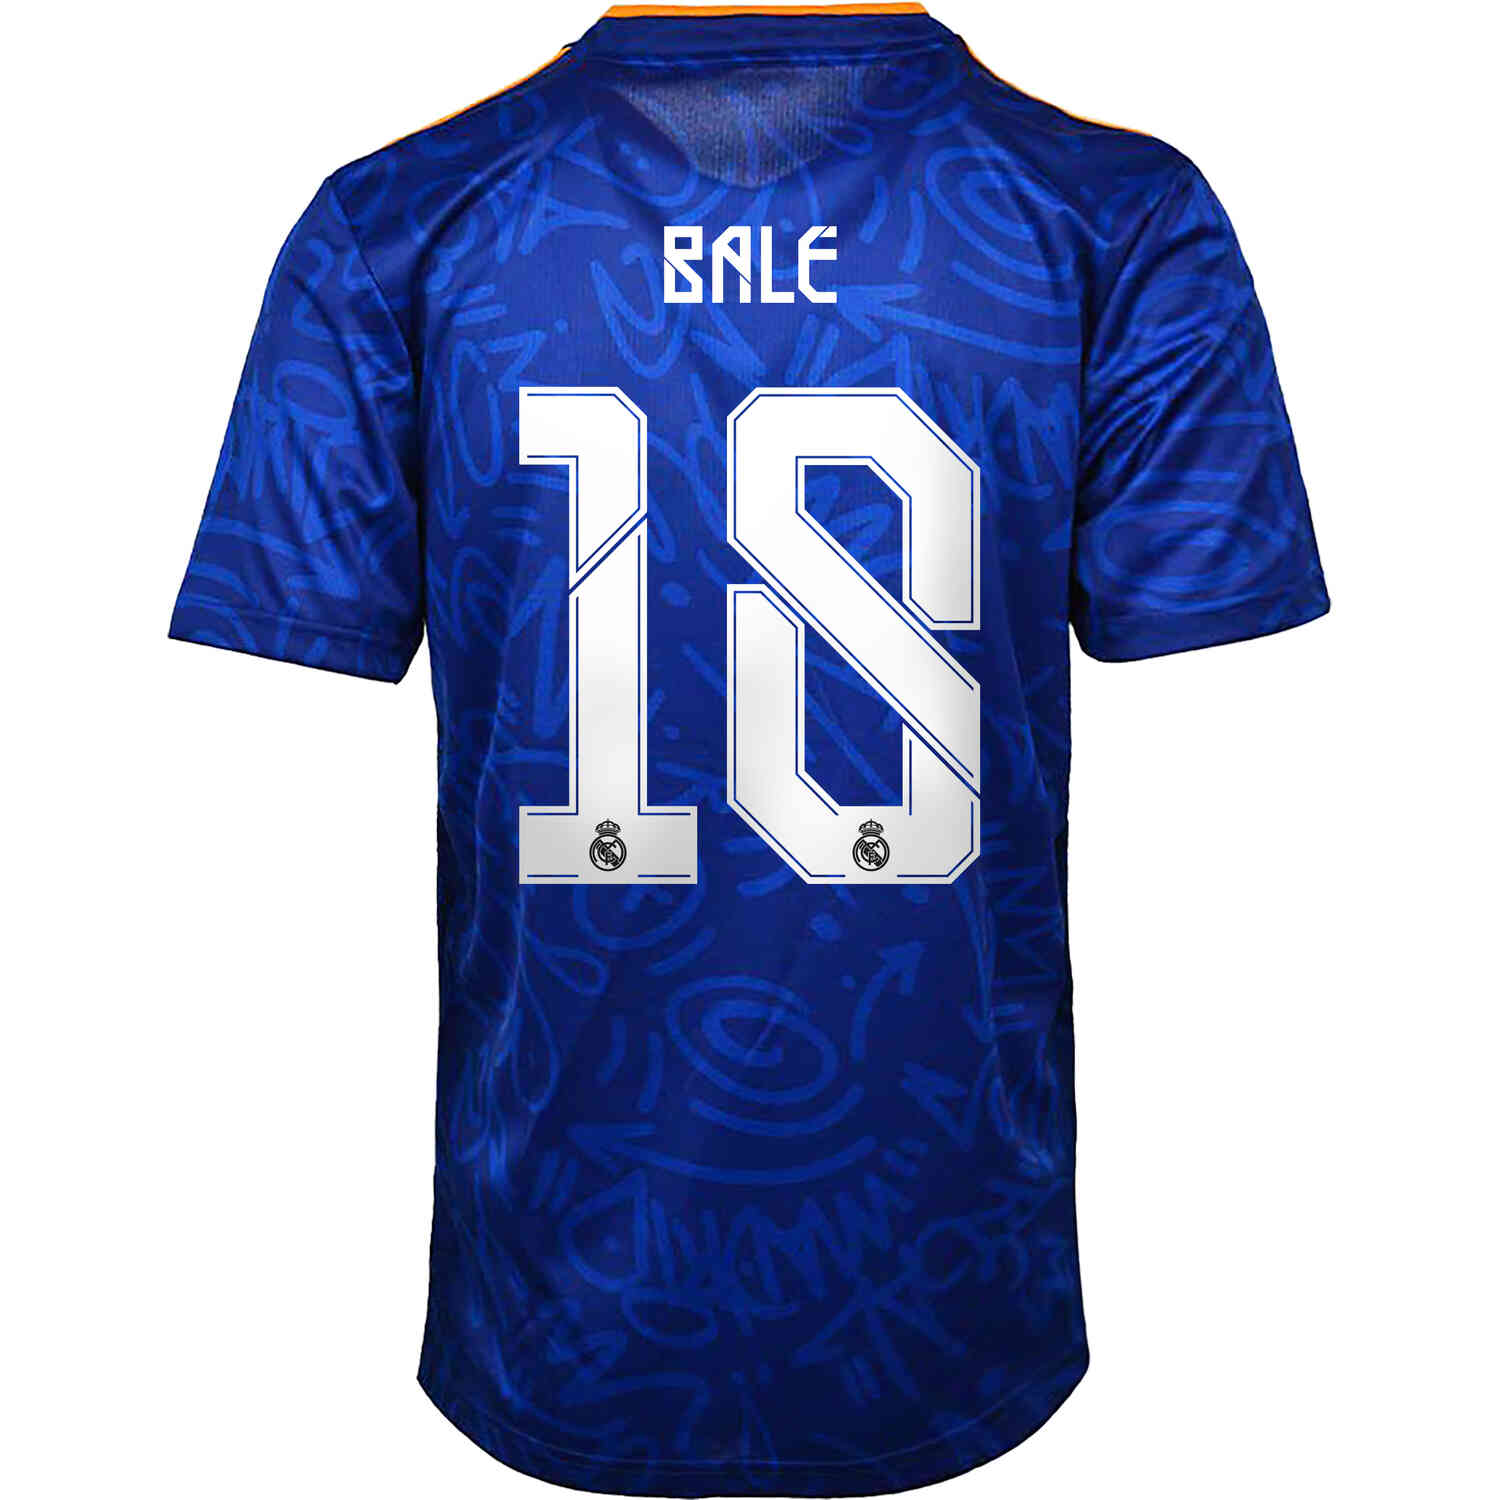 Gareth Bale shirts for sale in the Real Madrid club shop Stock